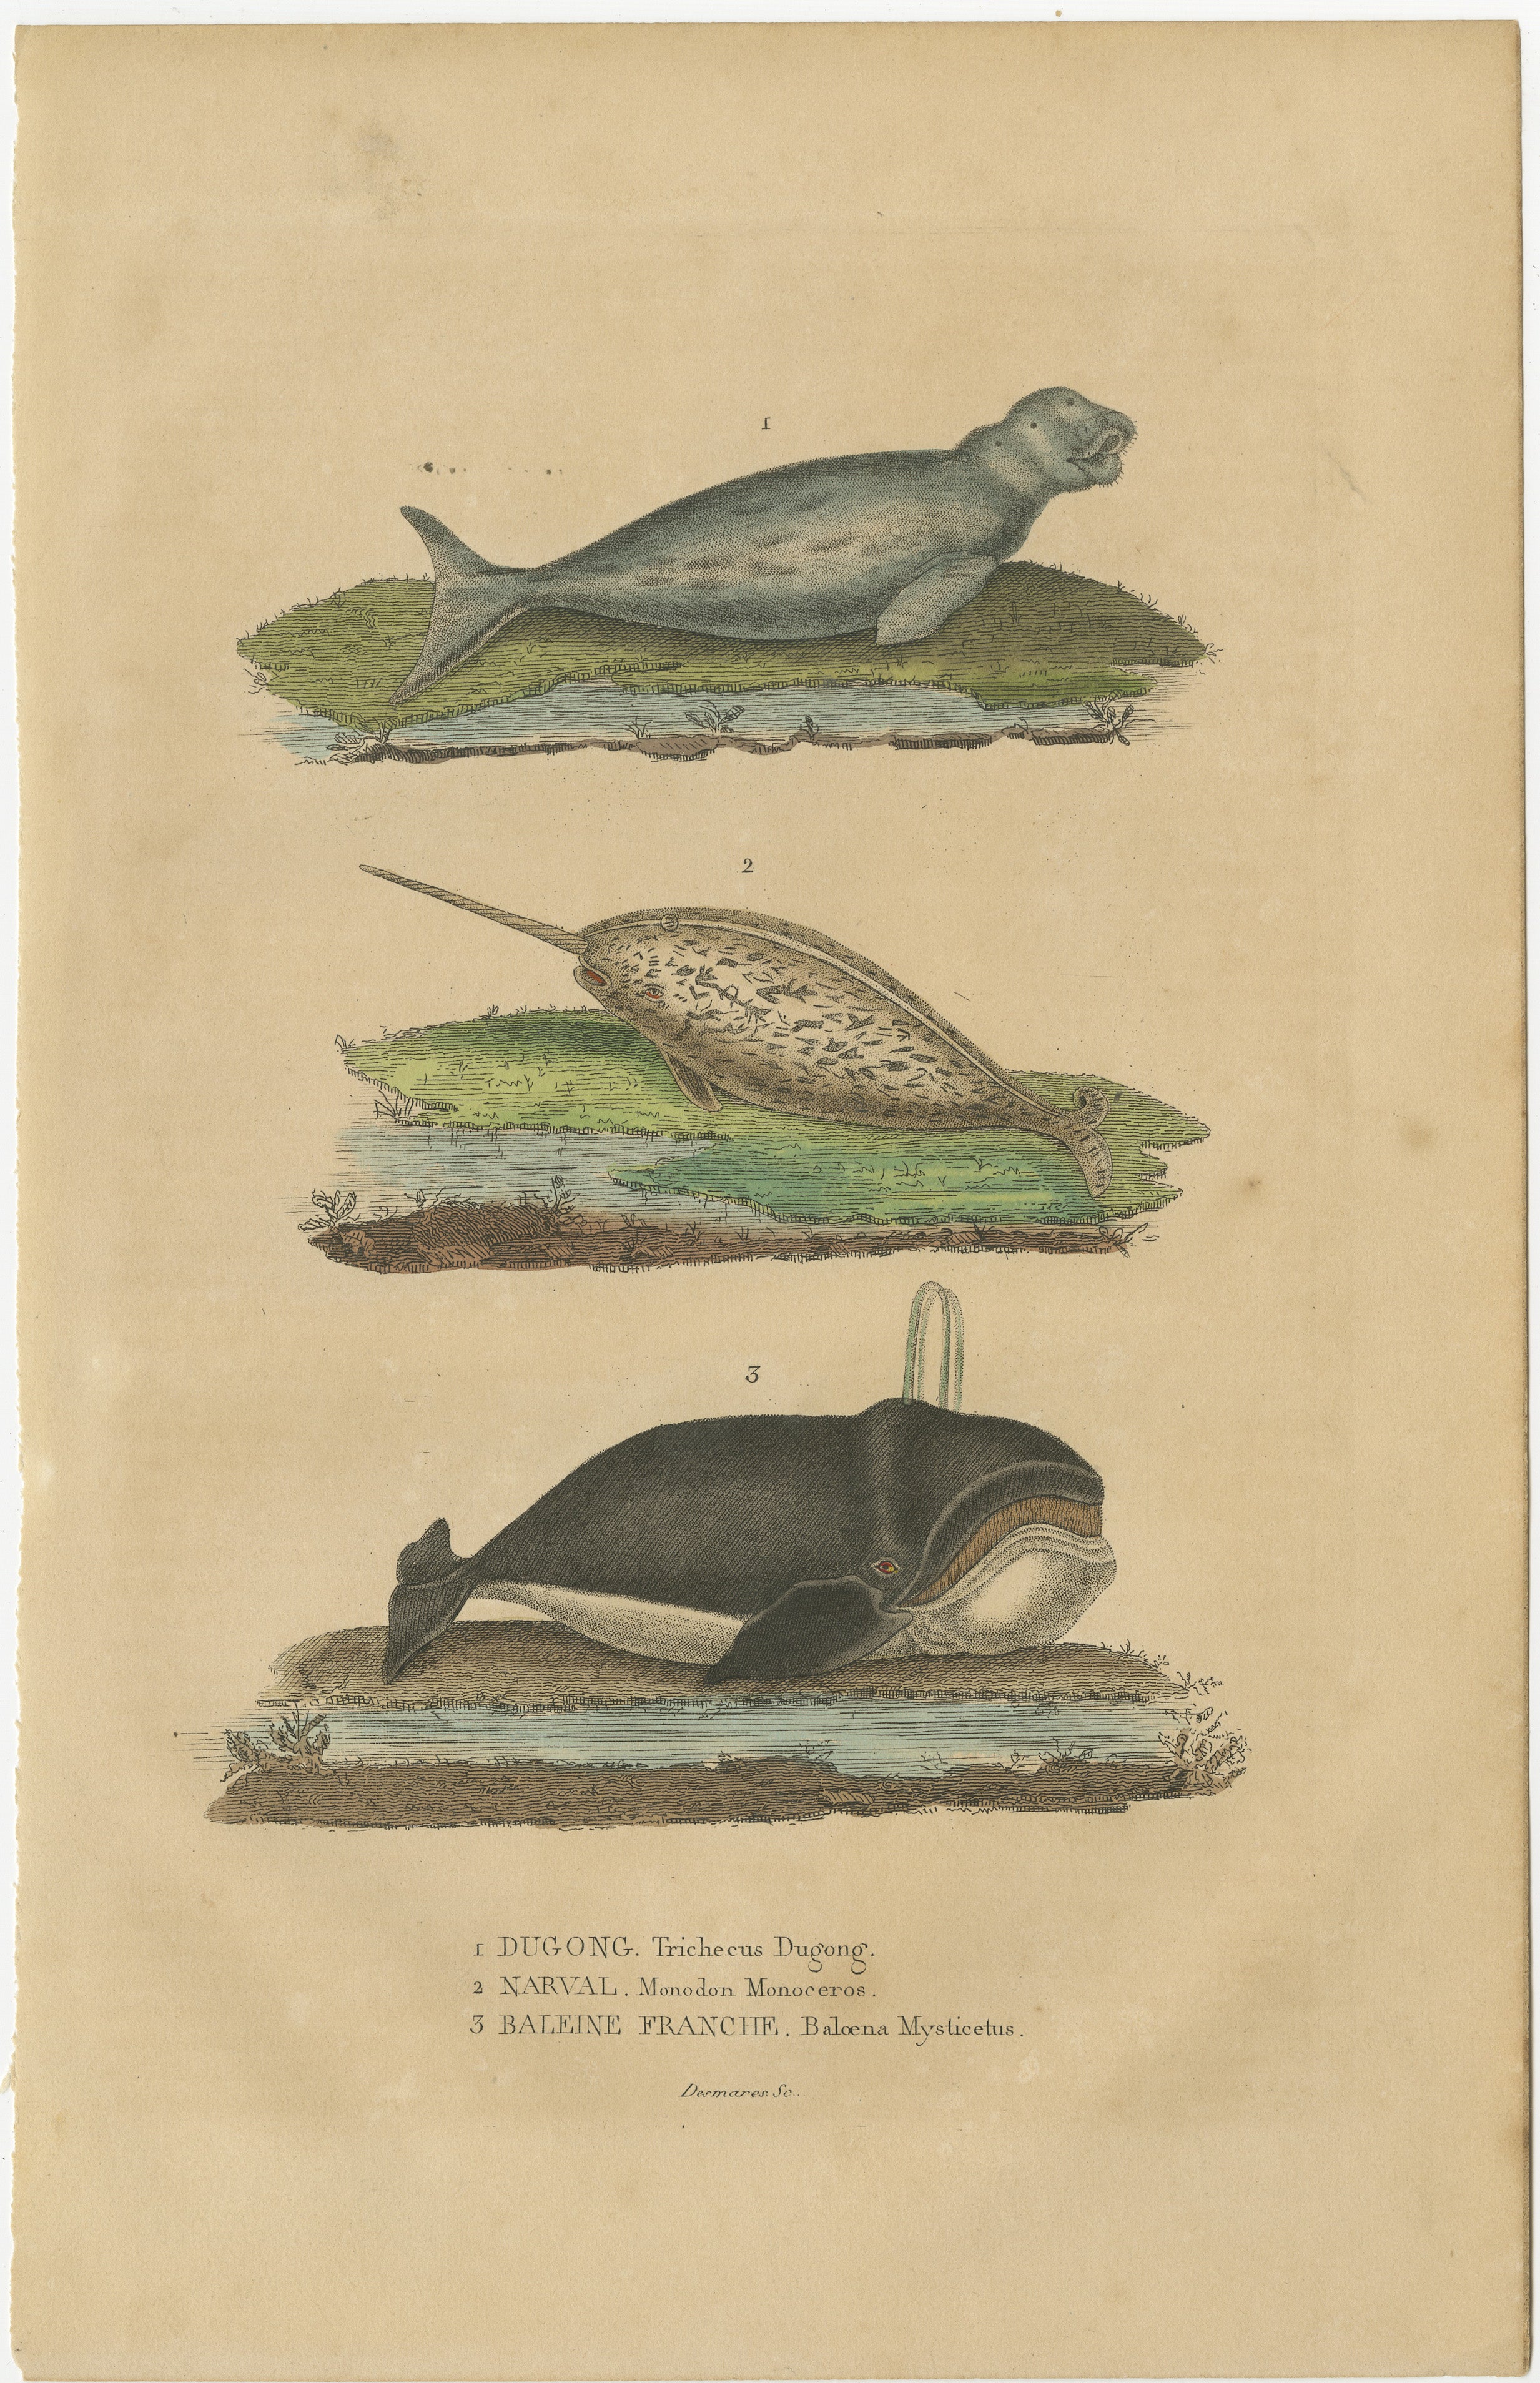 The creatures on this original antique print are: —The Dugong, Narwhal, and Right Whale—They are fascinating marine mammals, each with its unique characteristics and place in the oceans:

1. **Dugong:** Dugongs, also known as 